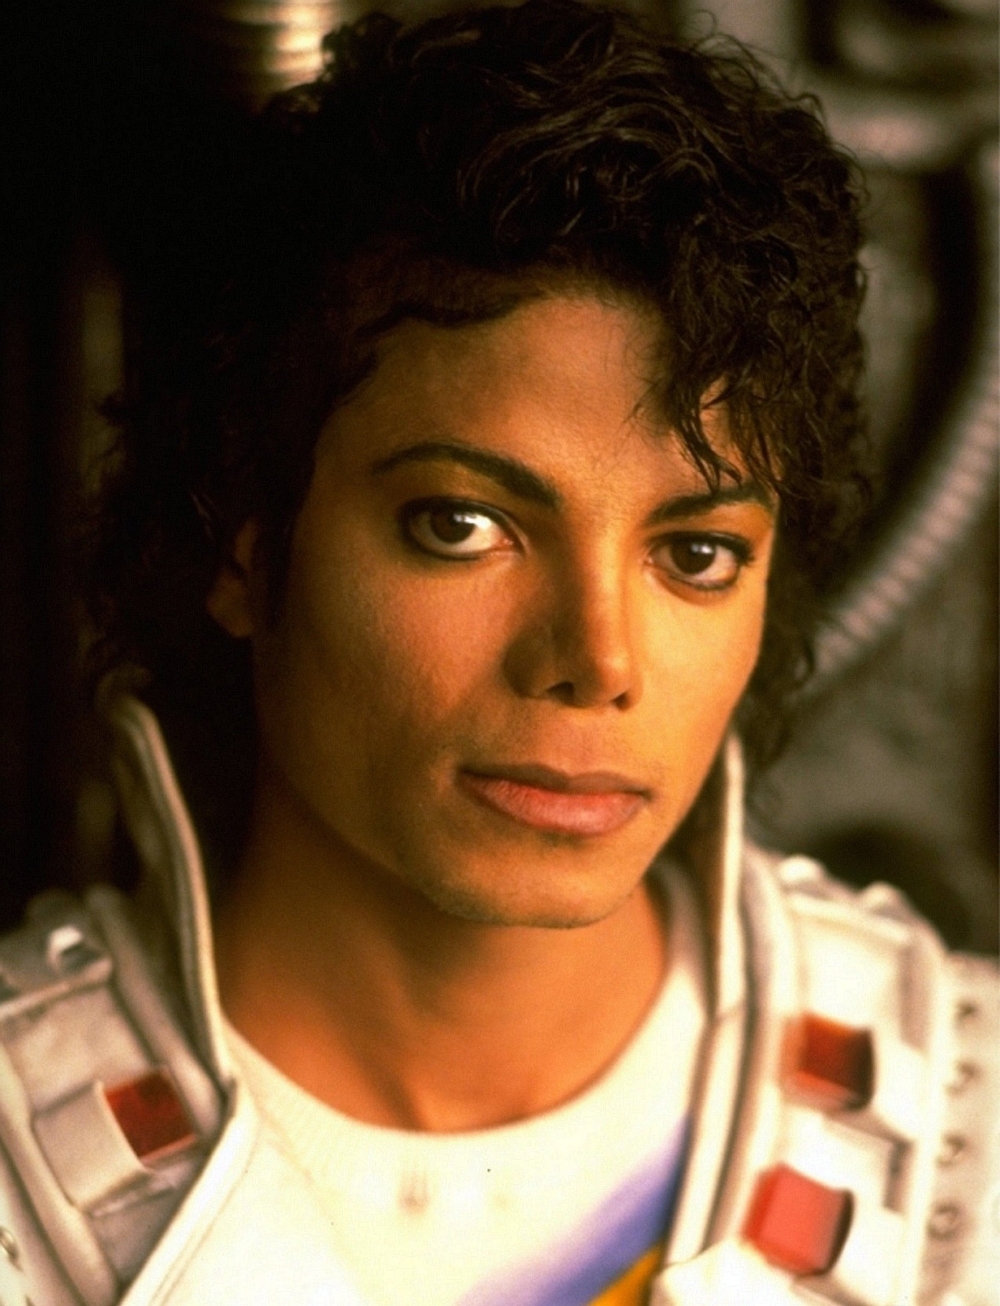 The late and great Michael Jackson